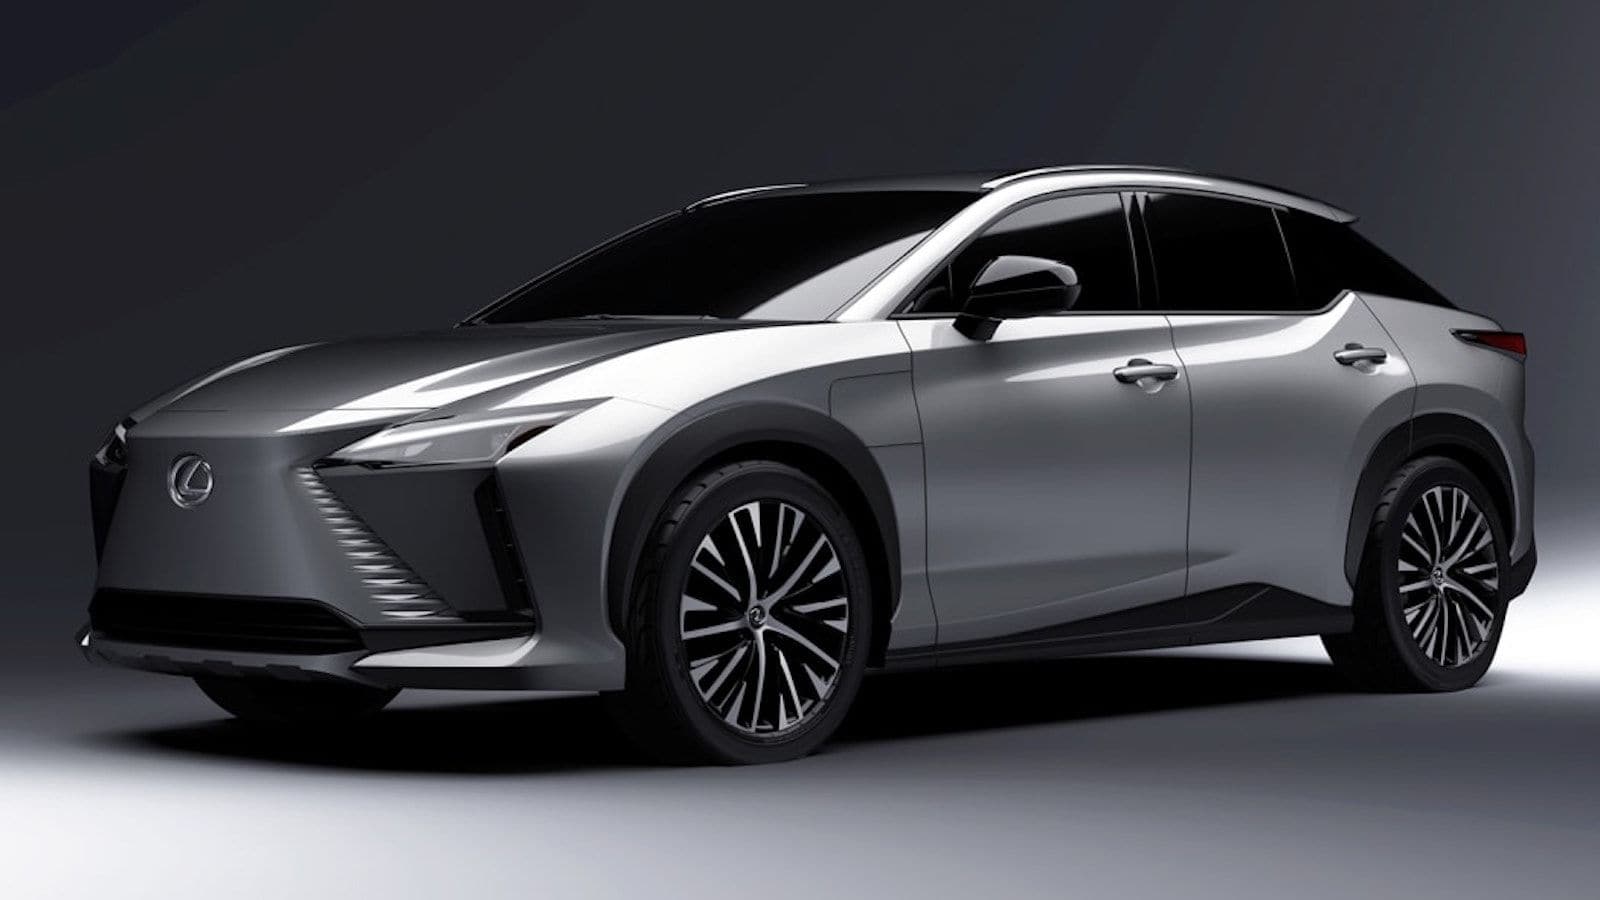 Lexus Gives a Better Look at Its Electric SUV Concept Clublexus